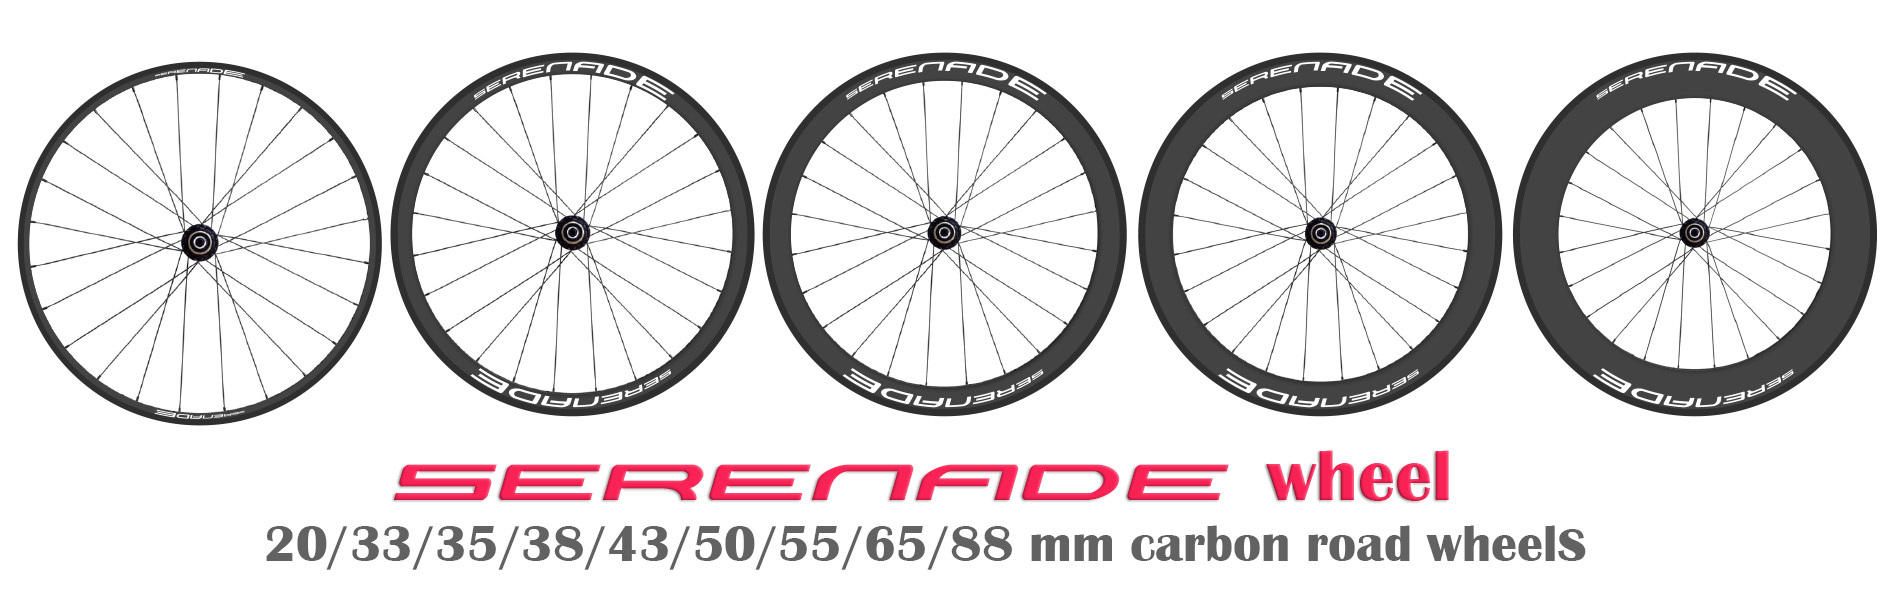 HOW TO CHOOSE THE BEST FOR YOU How to Choose and Save, How to Choose and Save - Front, Reviews, Wheelsets